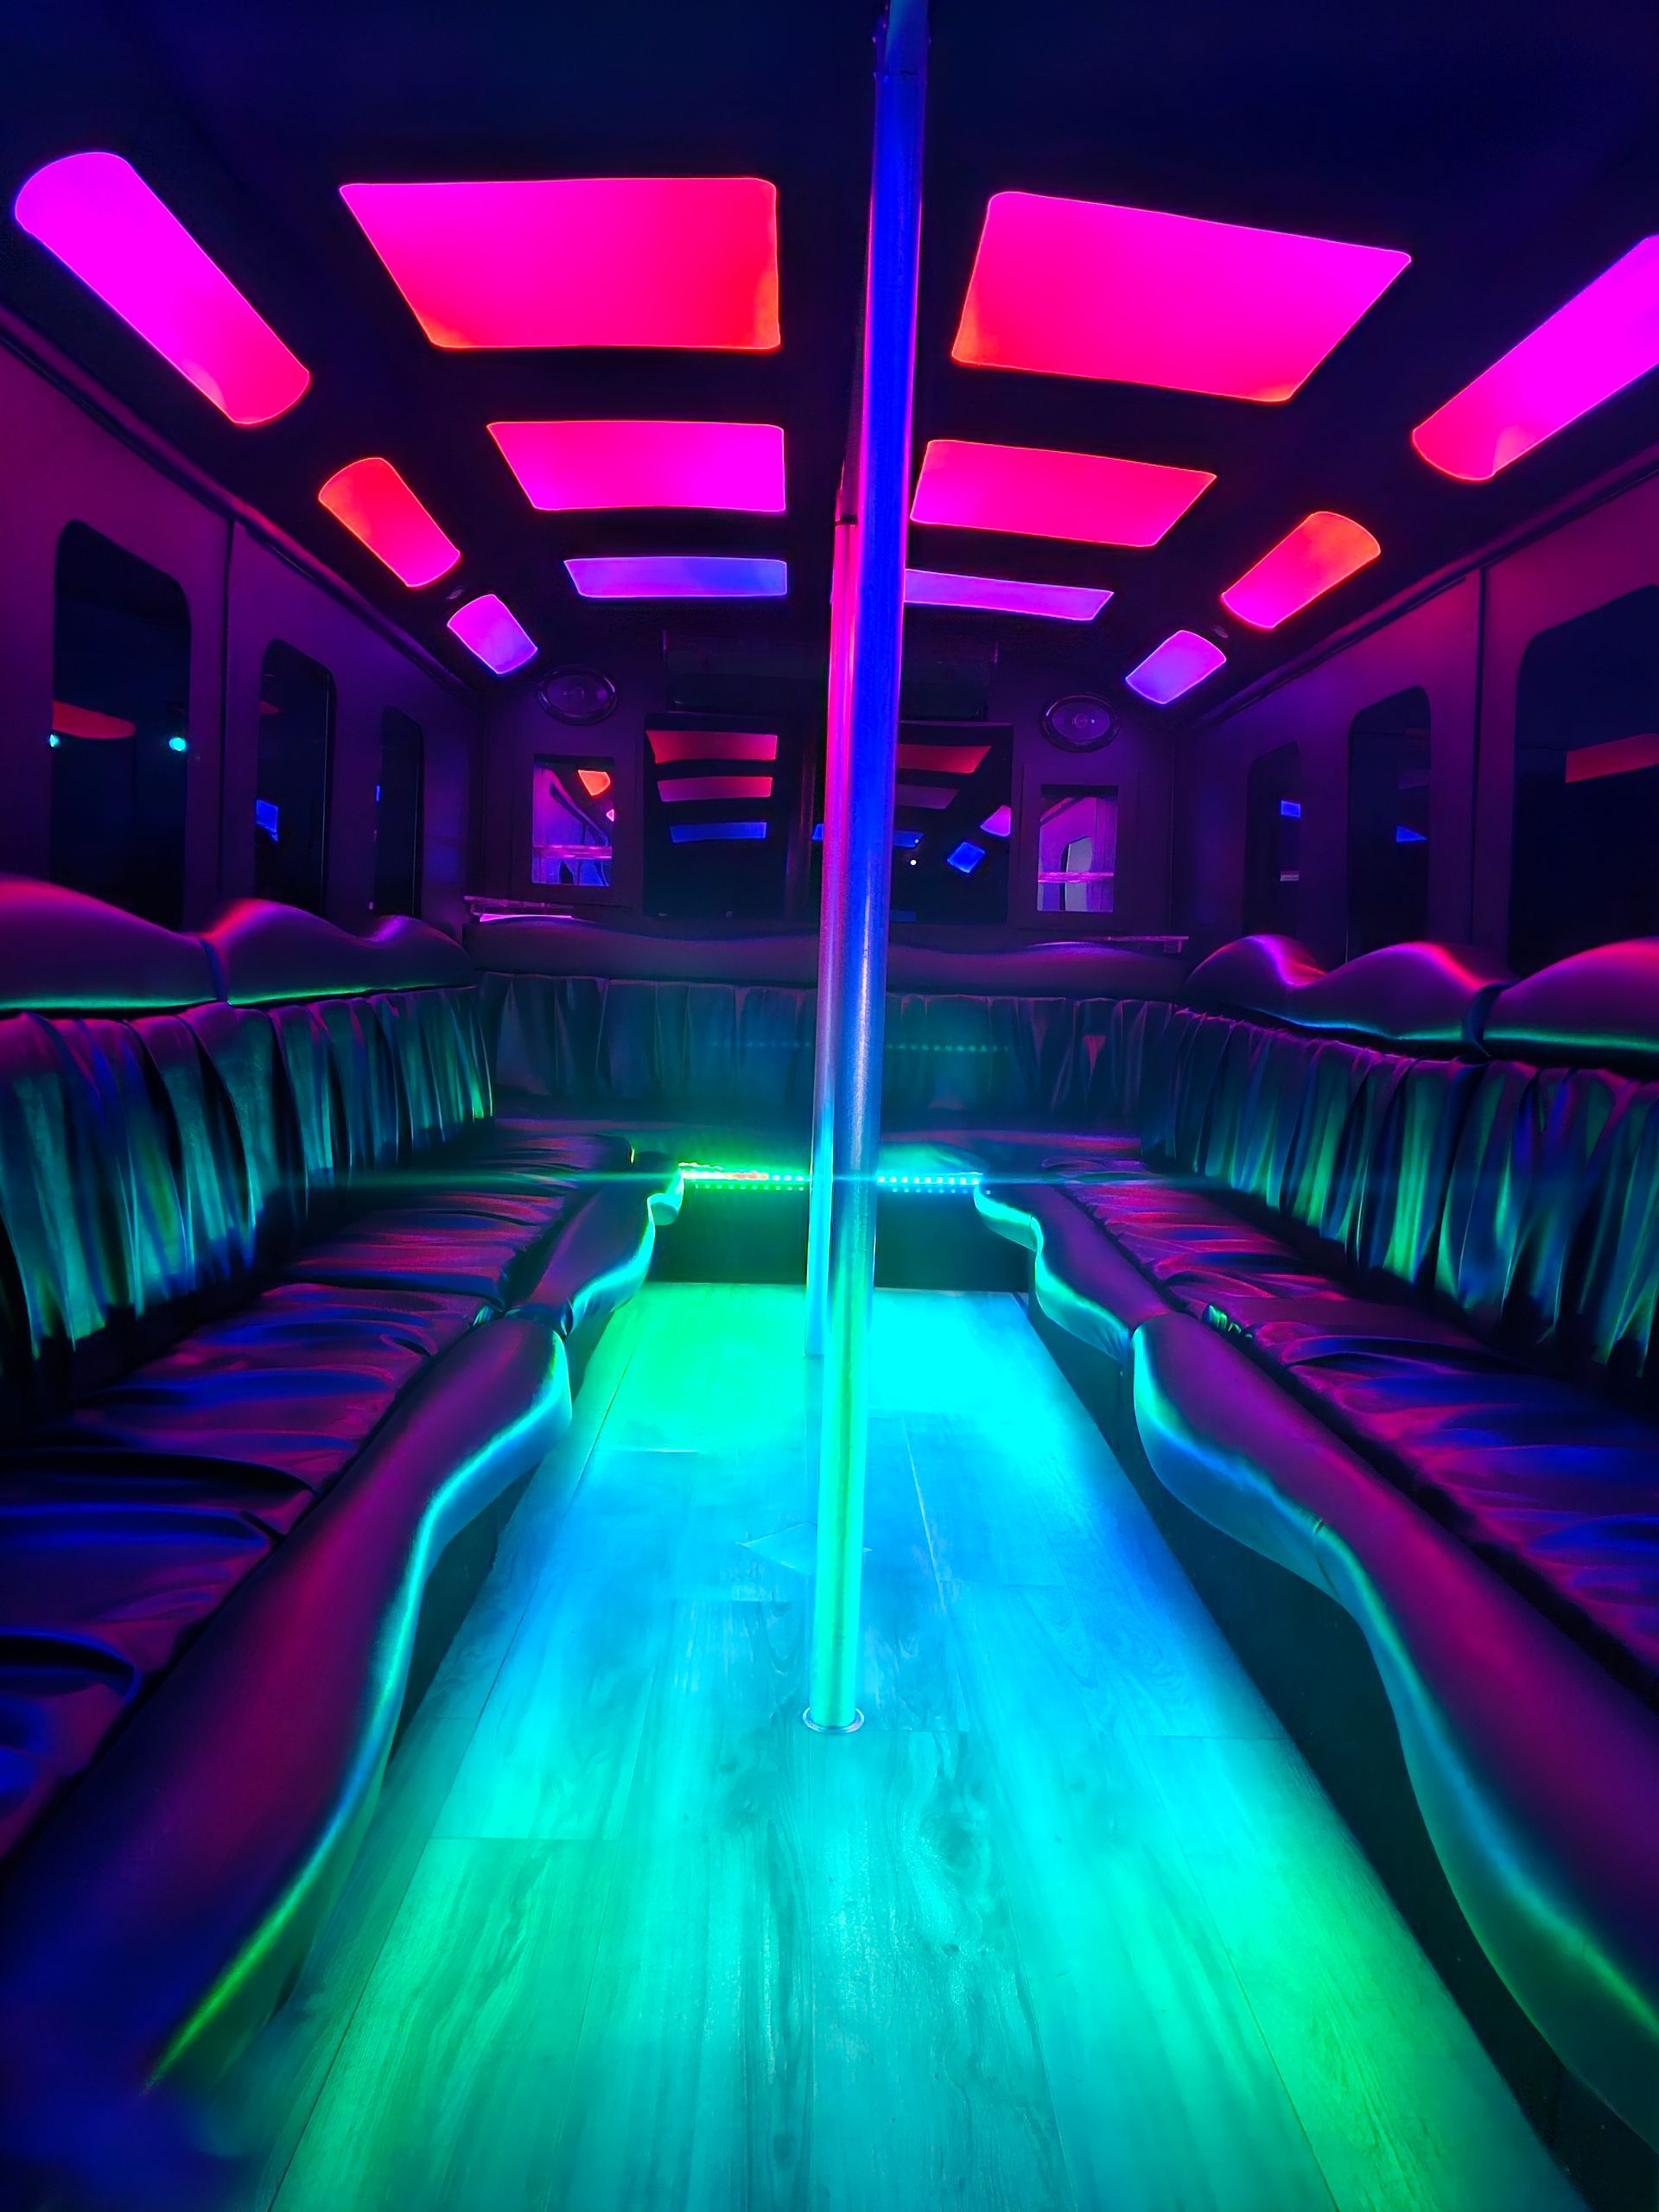 SATX San Antonio party bus inside view for up to 20 passengers